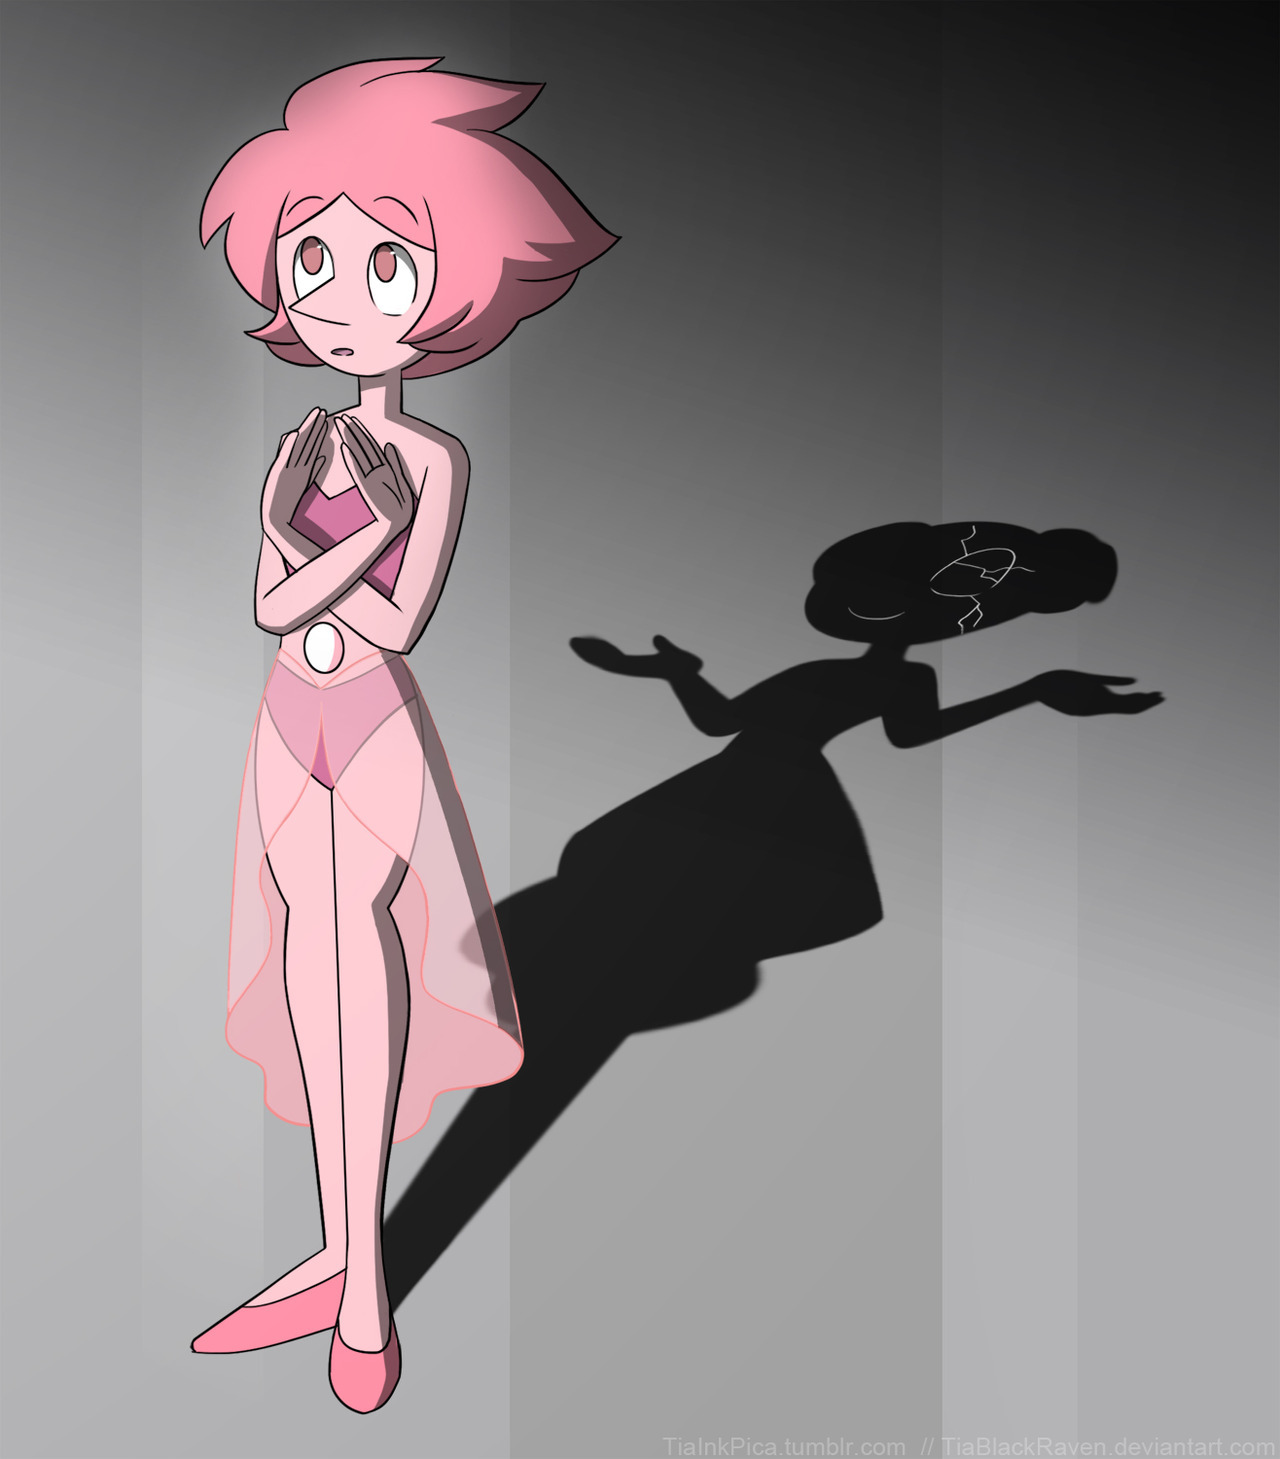 Many theorize that the White (creepy) Pearl, who find in the last ep. of SU, is the original Pink Pearl for Pink Diamond, but, after the death of her, she was “adjusted” by White Diamond to become his...